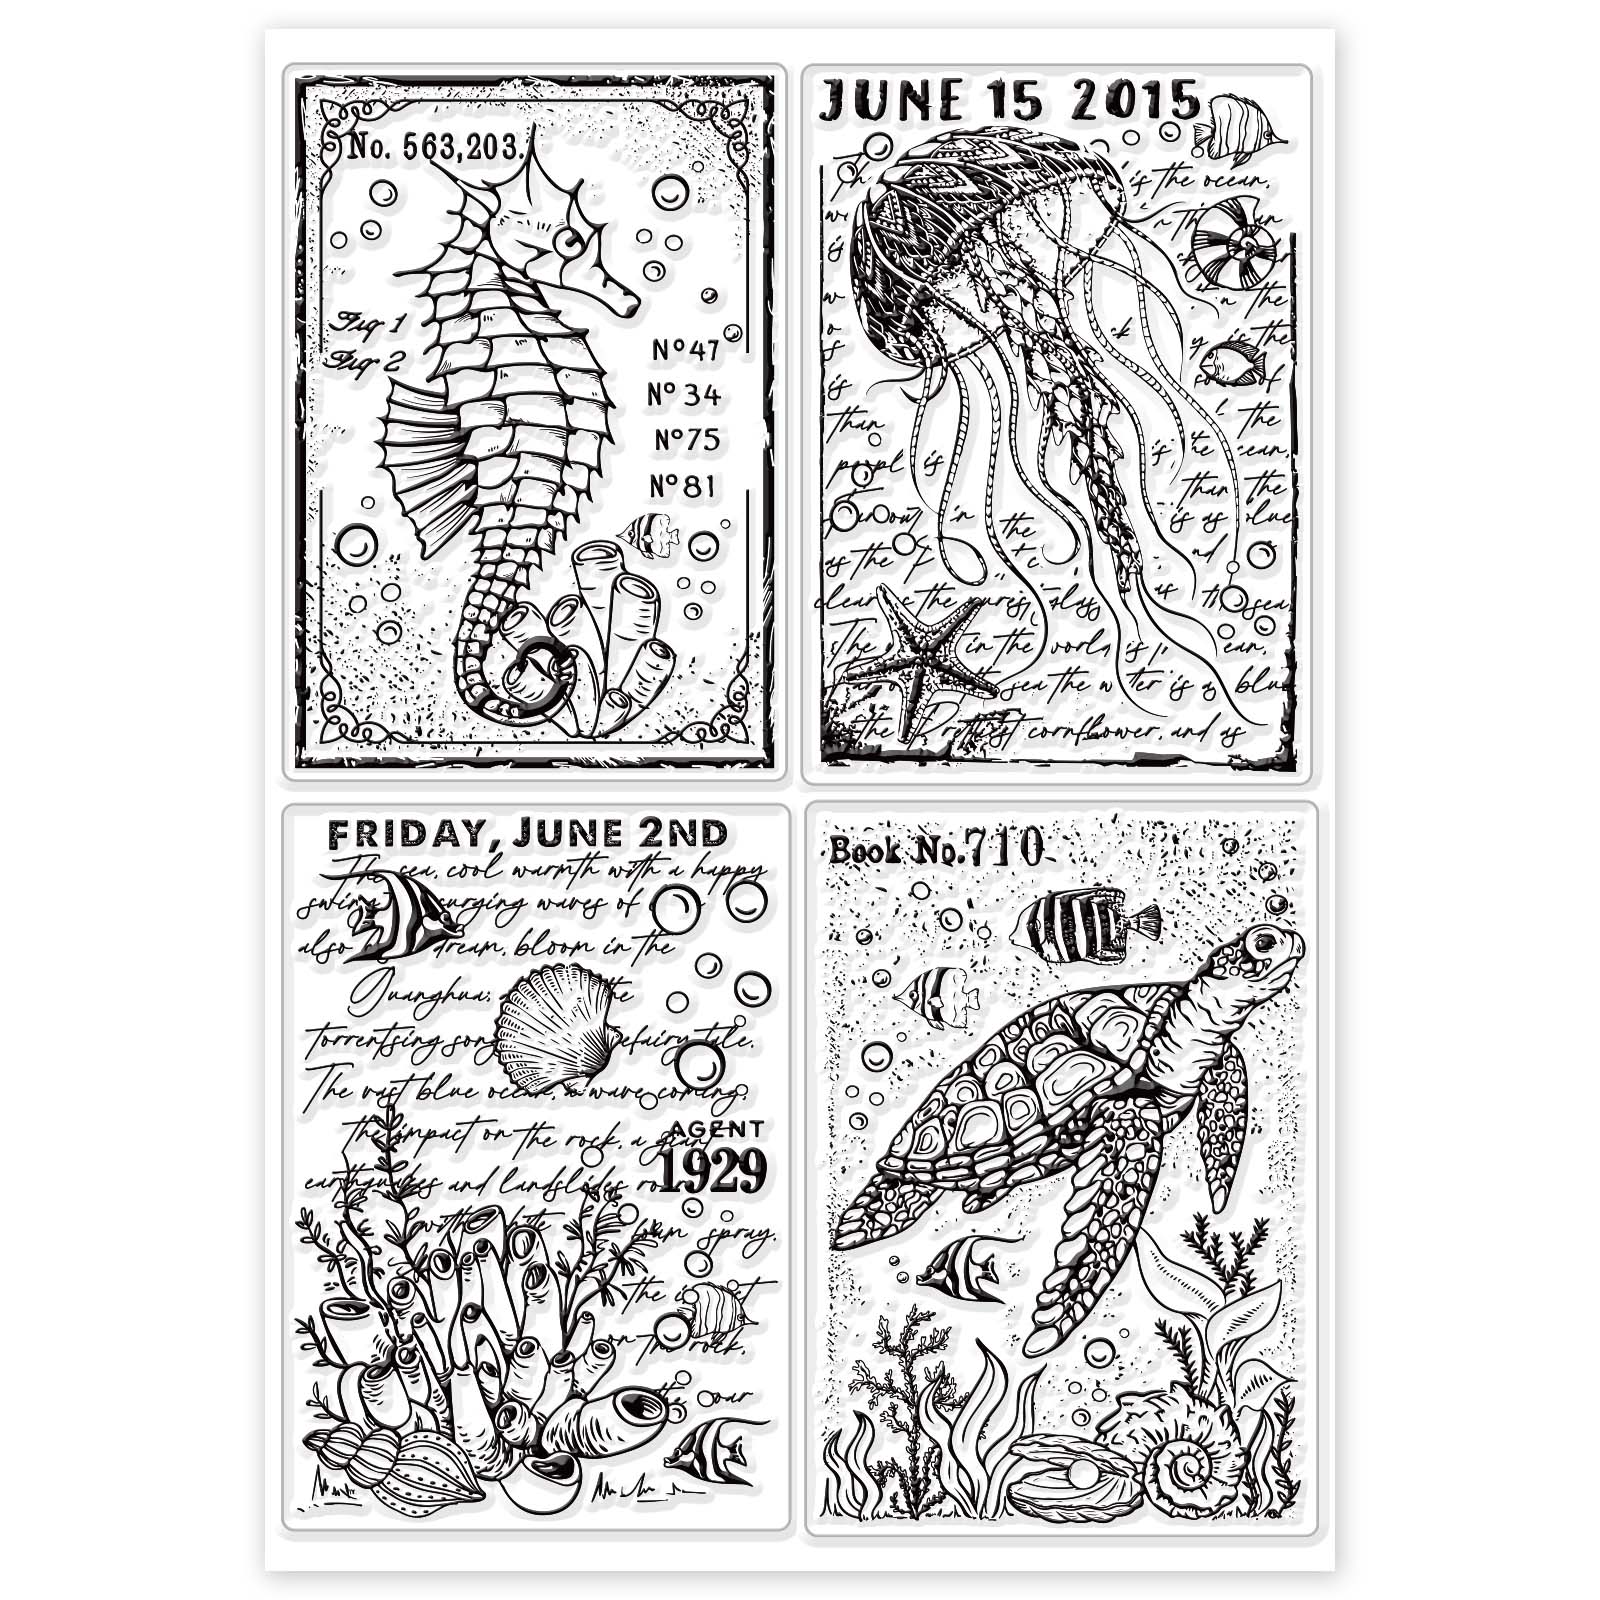 Globleland Seahorse, Sea Turtle, Shell, Conch Clear Stamps Seal for Card Making Decoration and DIY Scrapbooking